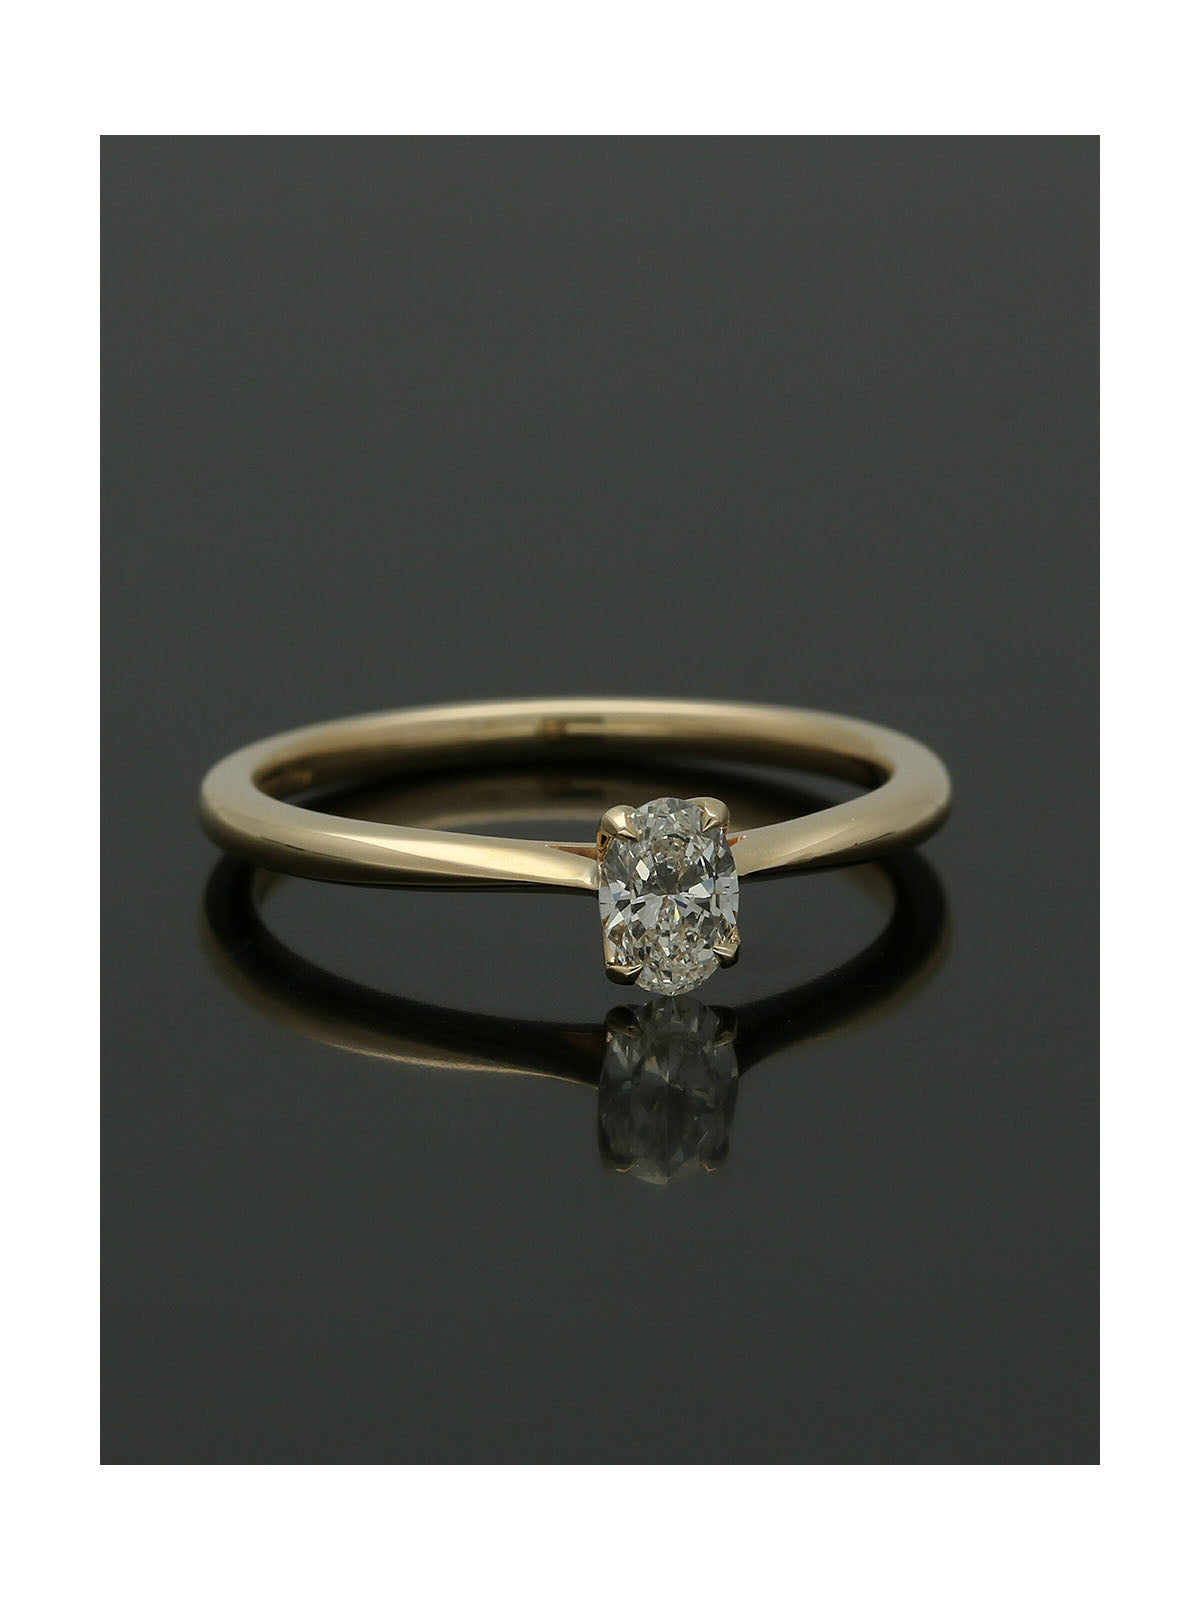 Diamond Solitaire Engagement Ring 0.25ct Oval Cut in 9ct Yellow Gold